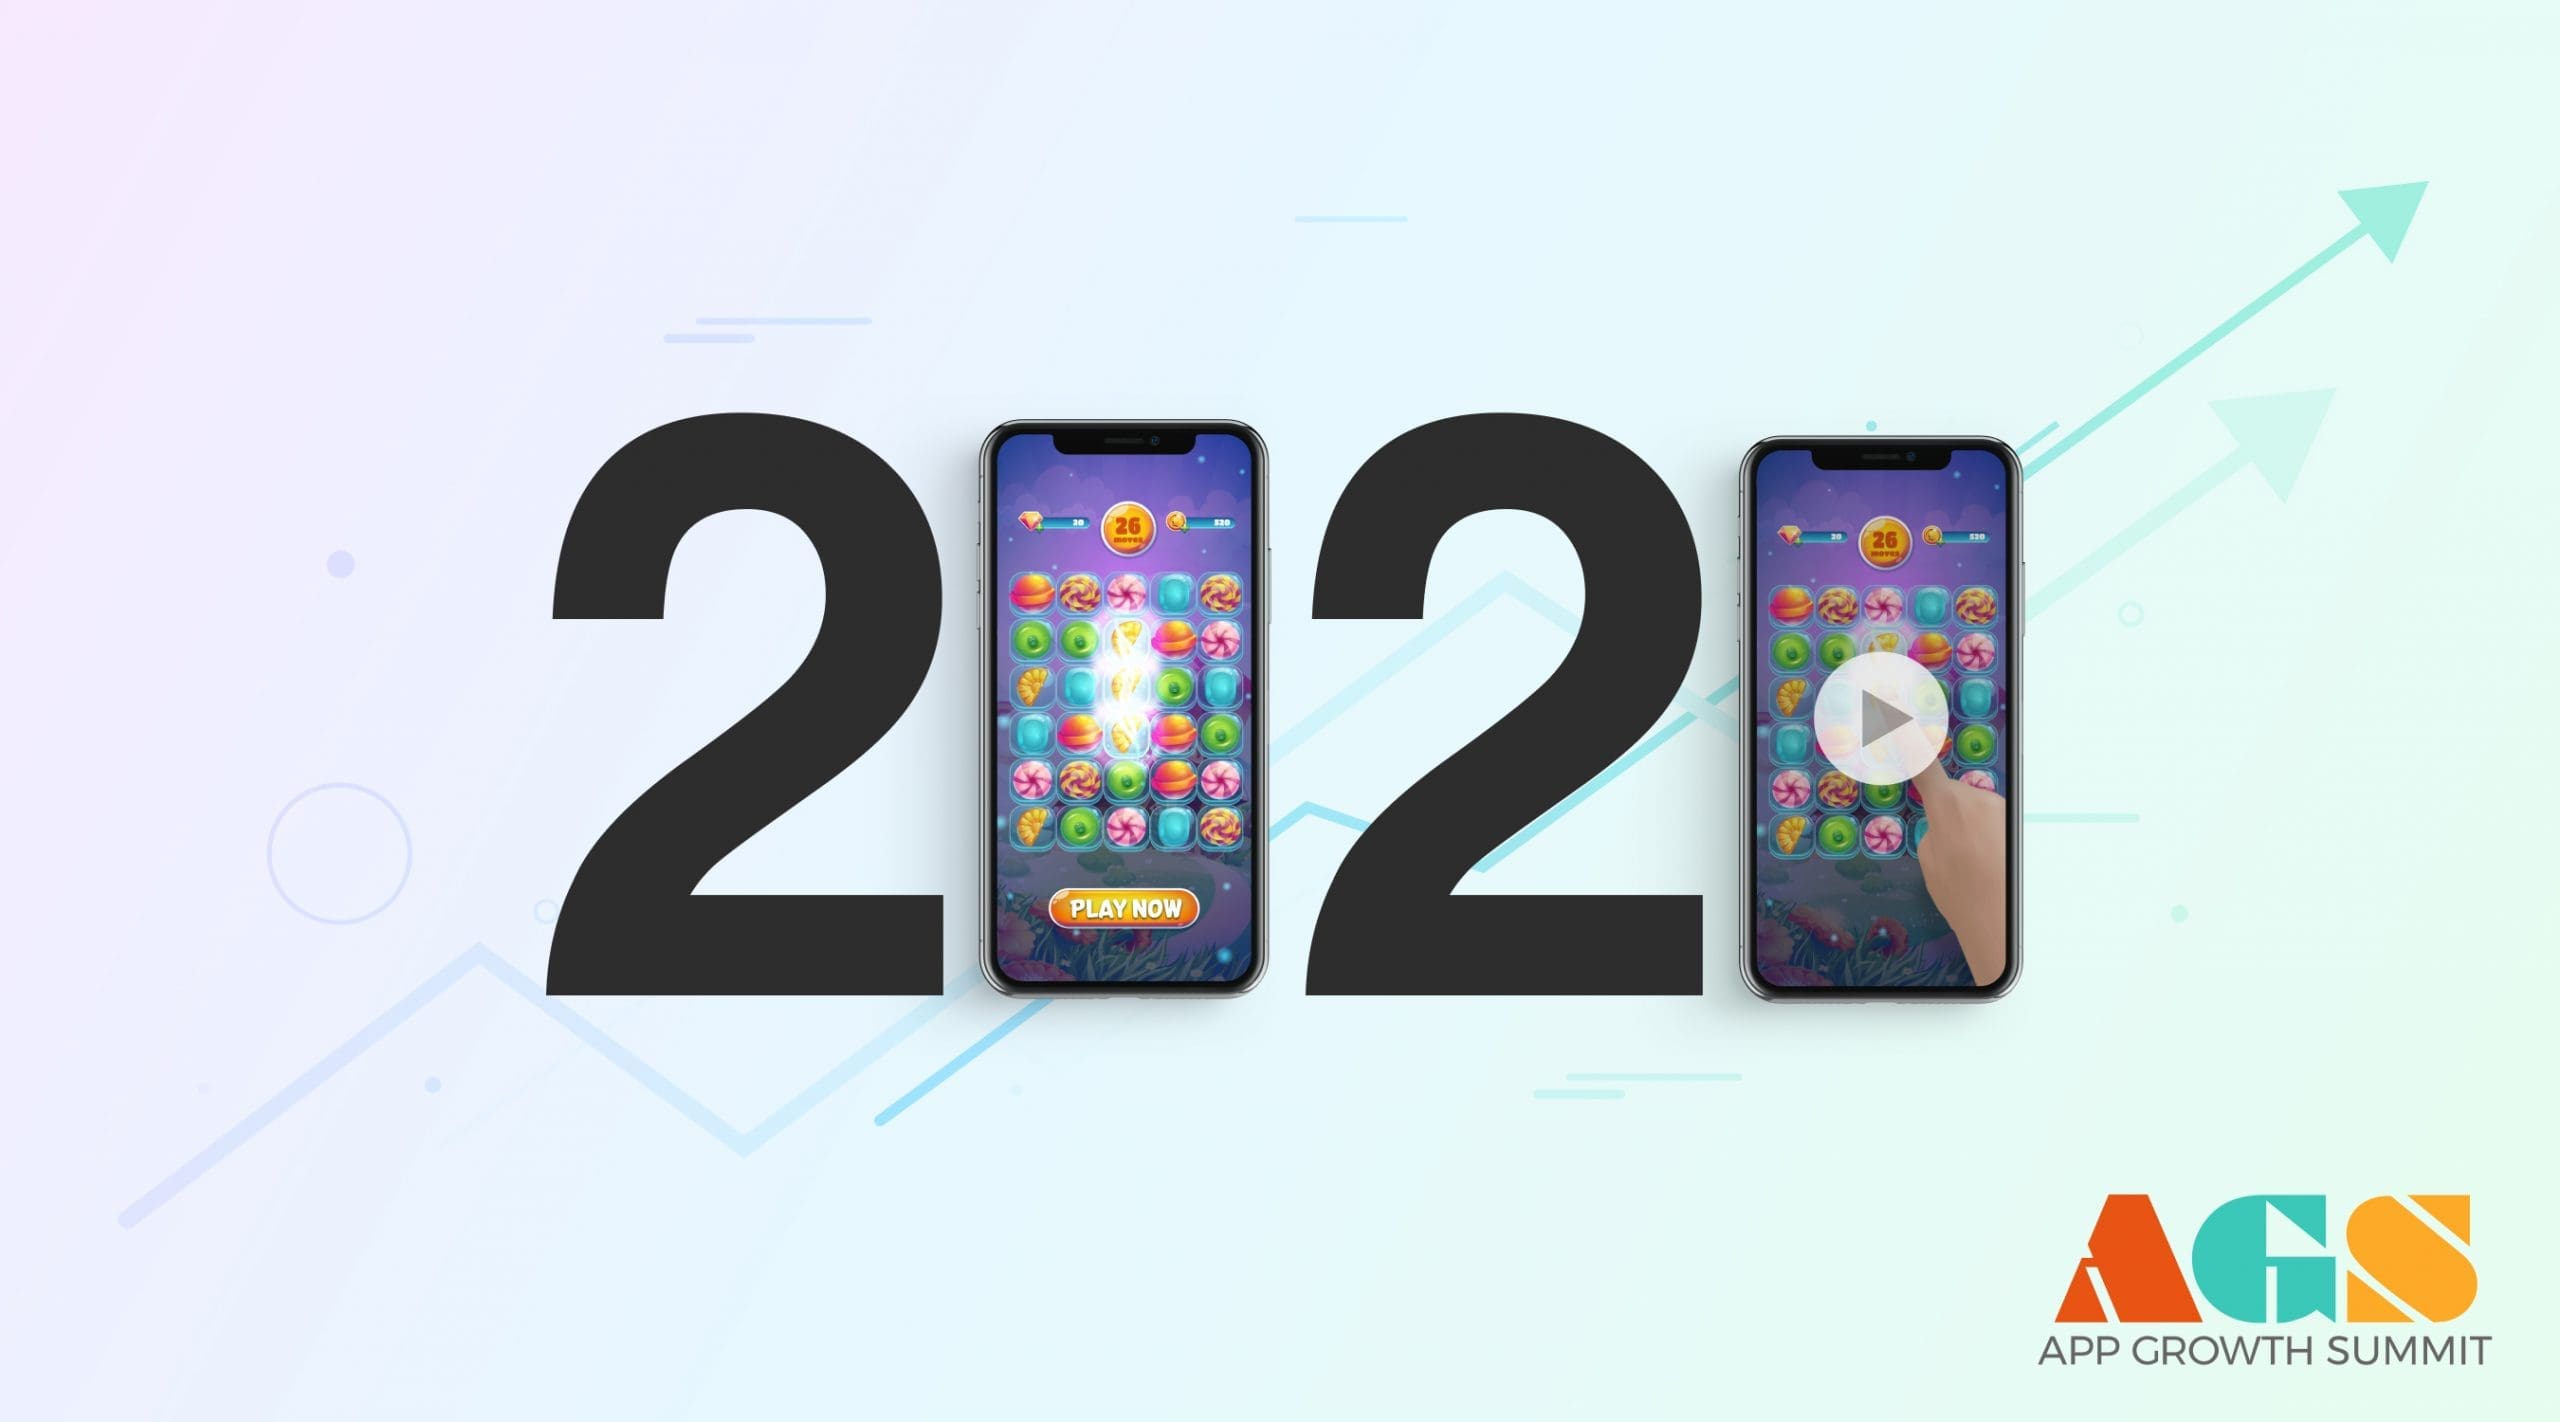 2020 spelled out with phones displaying ads and games replacing the 0s and an arrow trajectory going upwards in the background